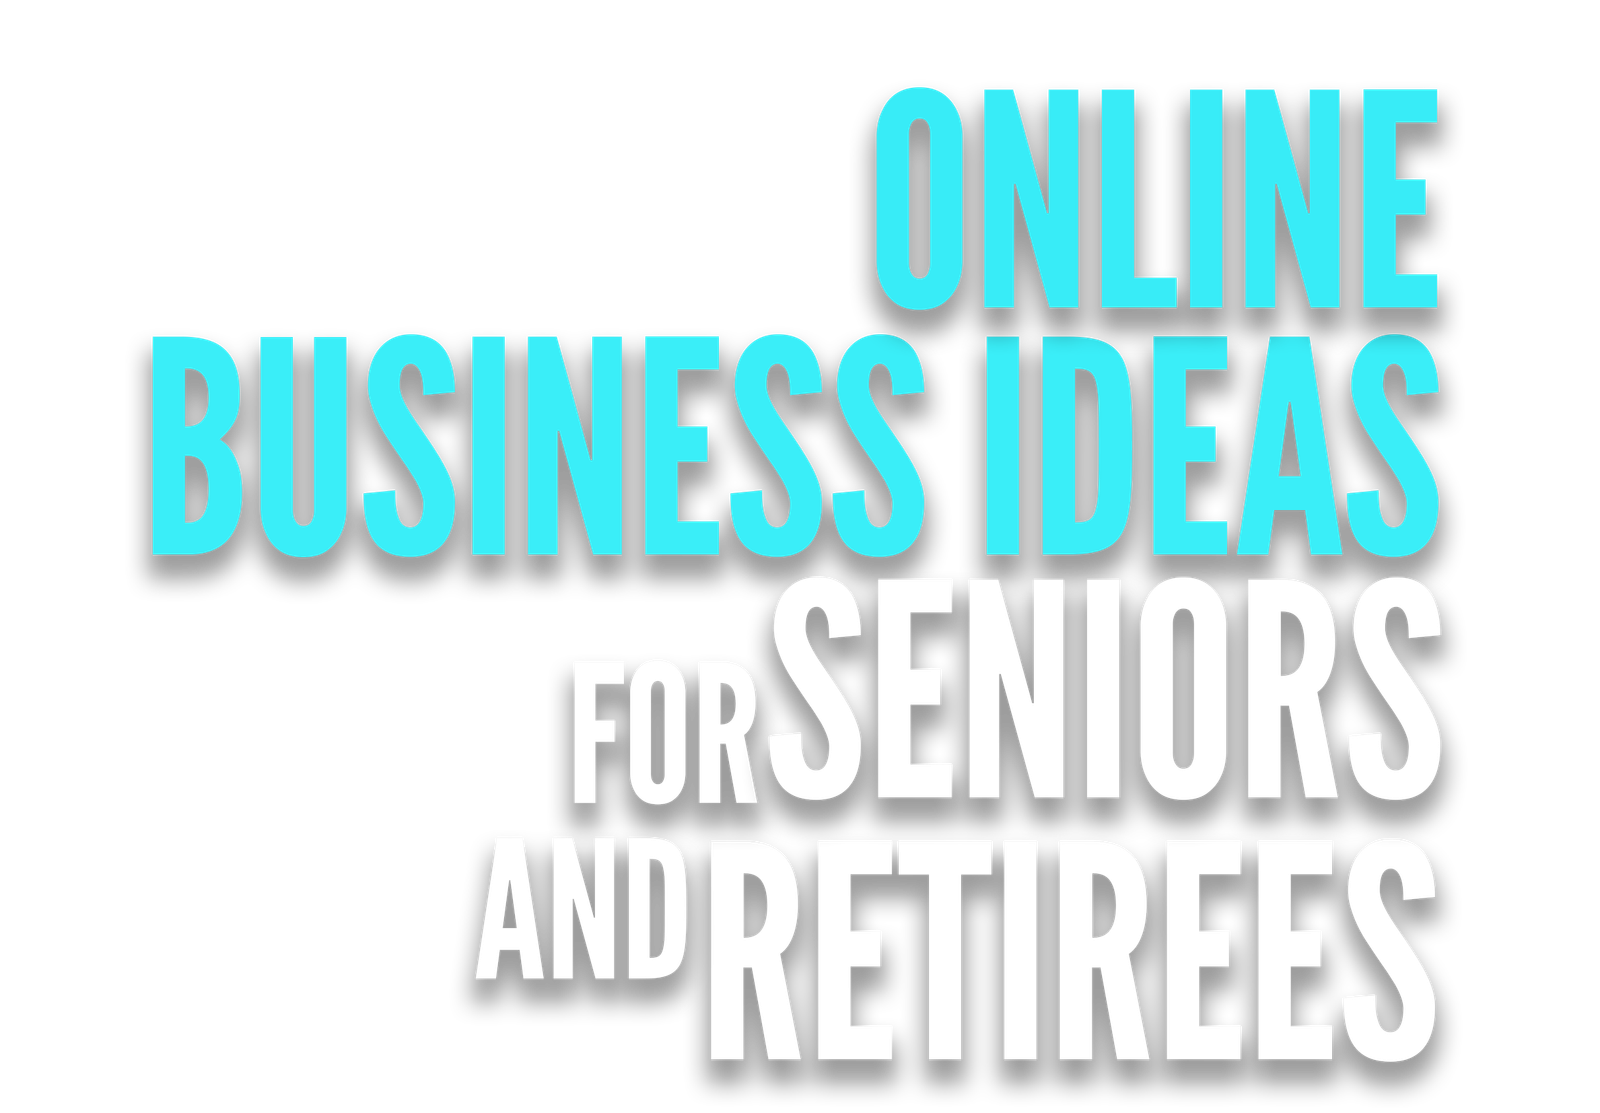 Online Business Ideas For Seniors And Retirees
 